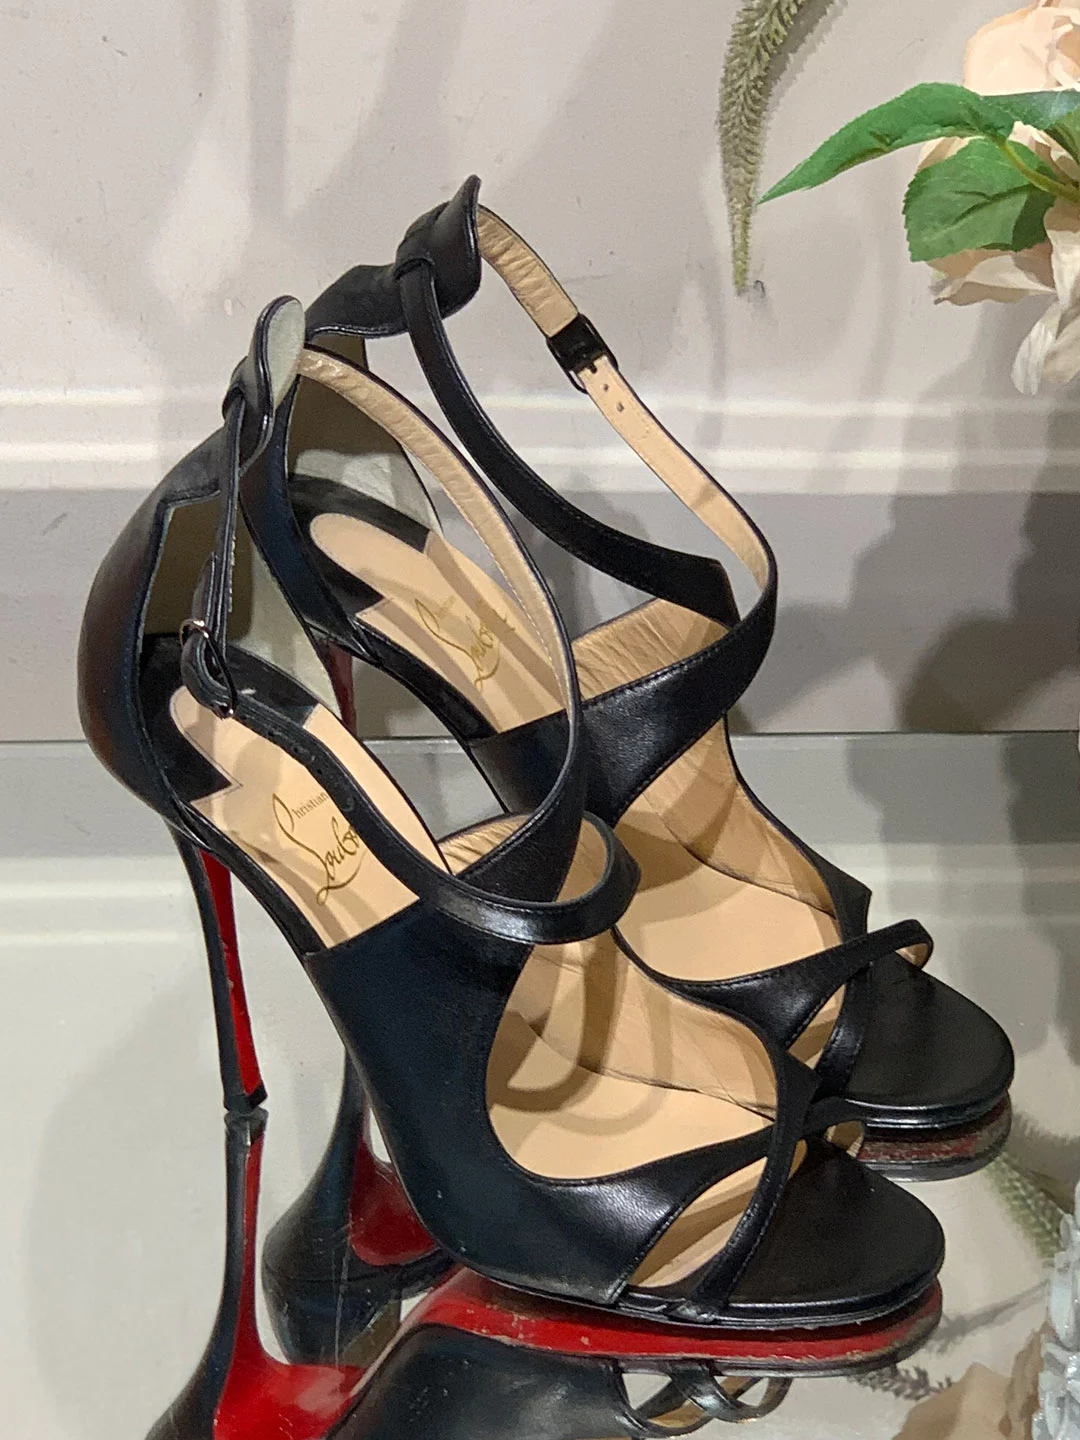 lindring dybde død Christian Louboutin Black Strappy Heels Size 38.5 (UK 5.5) - Dress Cheshire  | Preloved Designer Fashion | Boutique in Cheshire